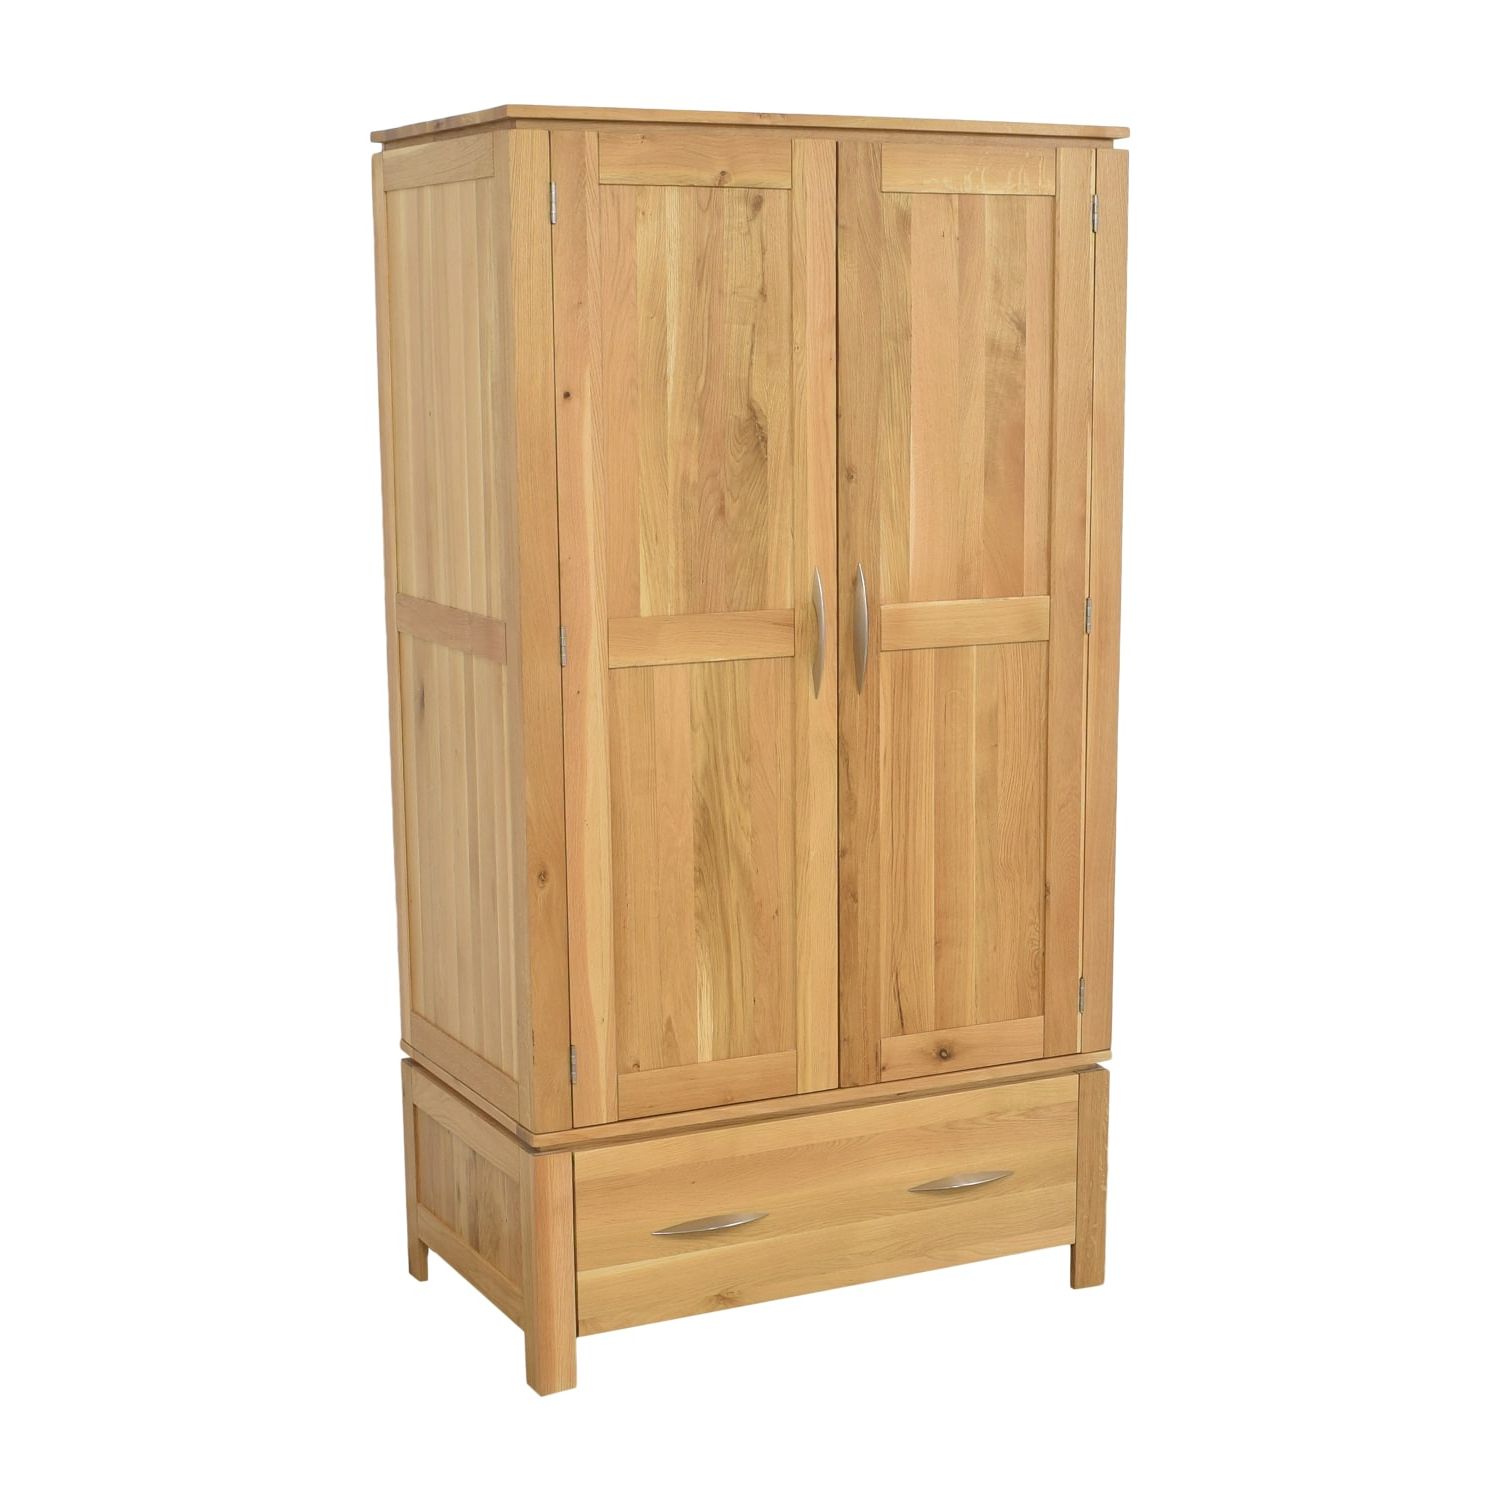 Oak Furnitureland Single Drawer Rustic Armoire | 49% Off | Kaiyo With Single Oak Wardrobes With Drawers (View 11 of 20)